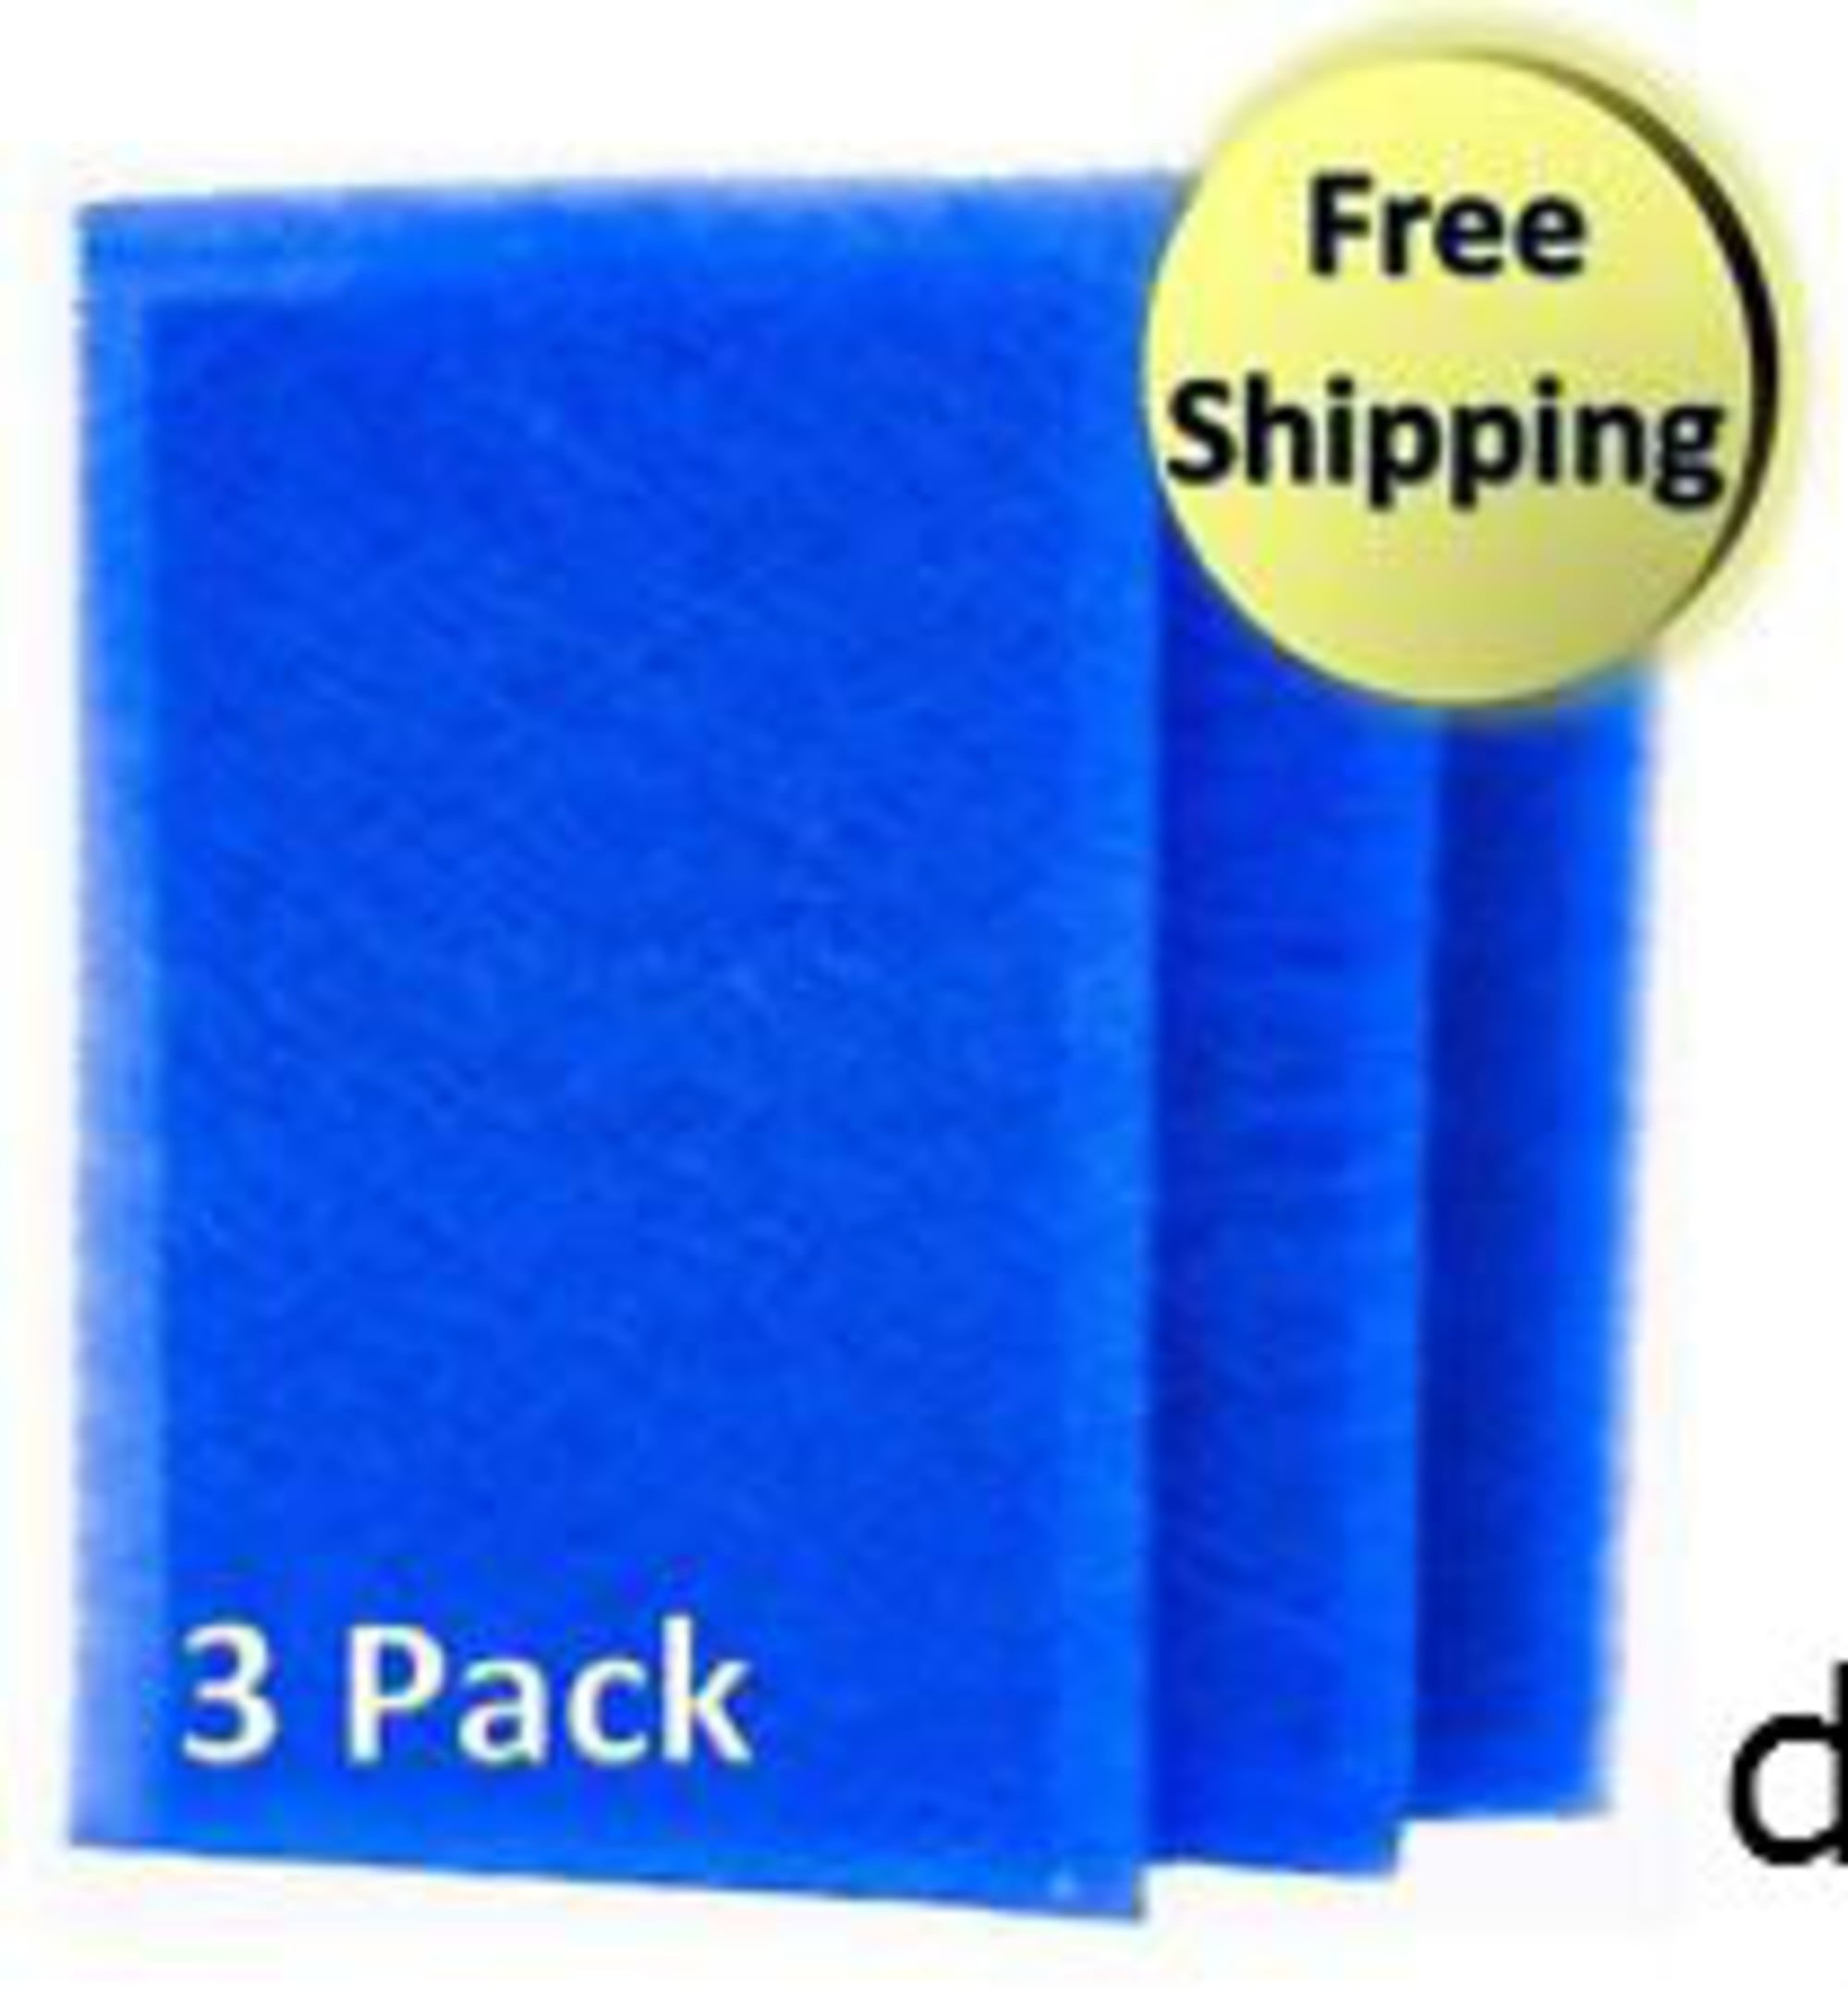 Dynamic Air Filter Replacement Filters 3 Pack Various Size Pads Free Shipping W* 